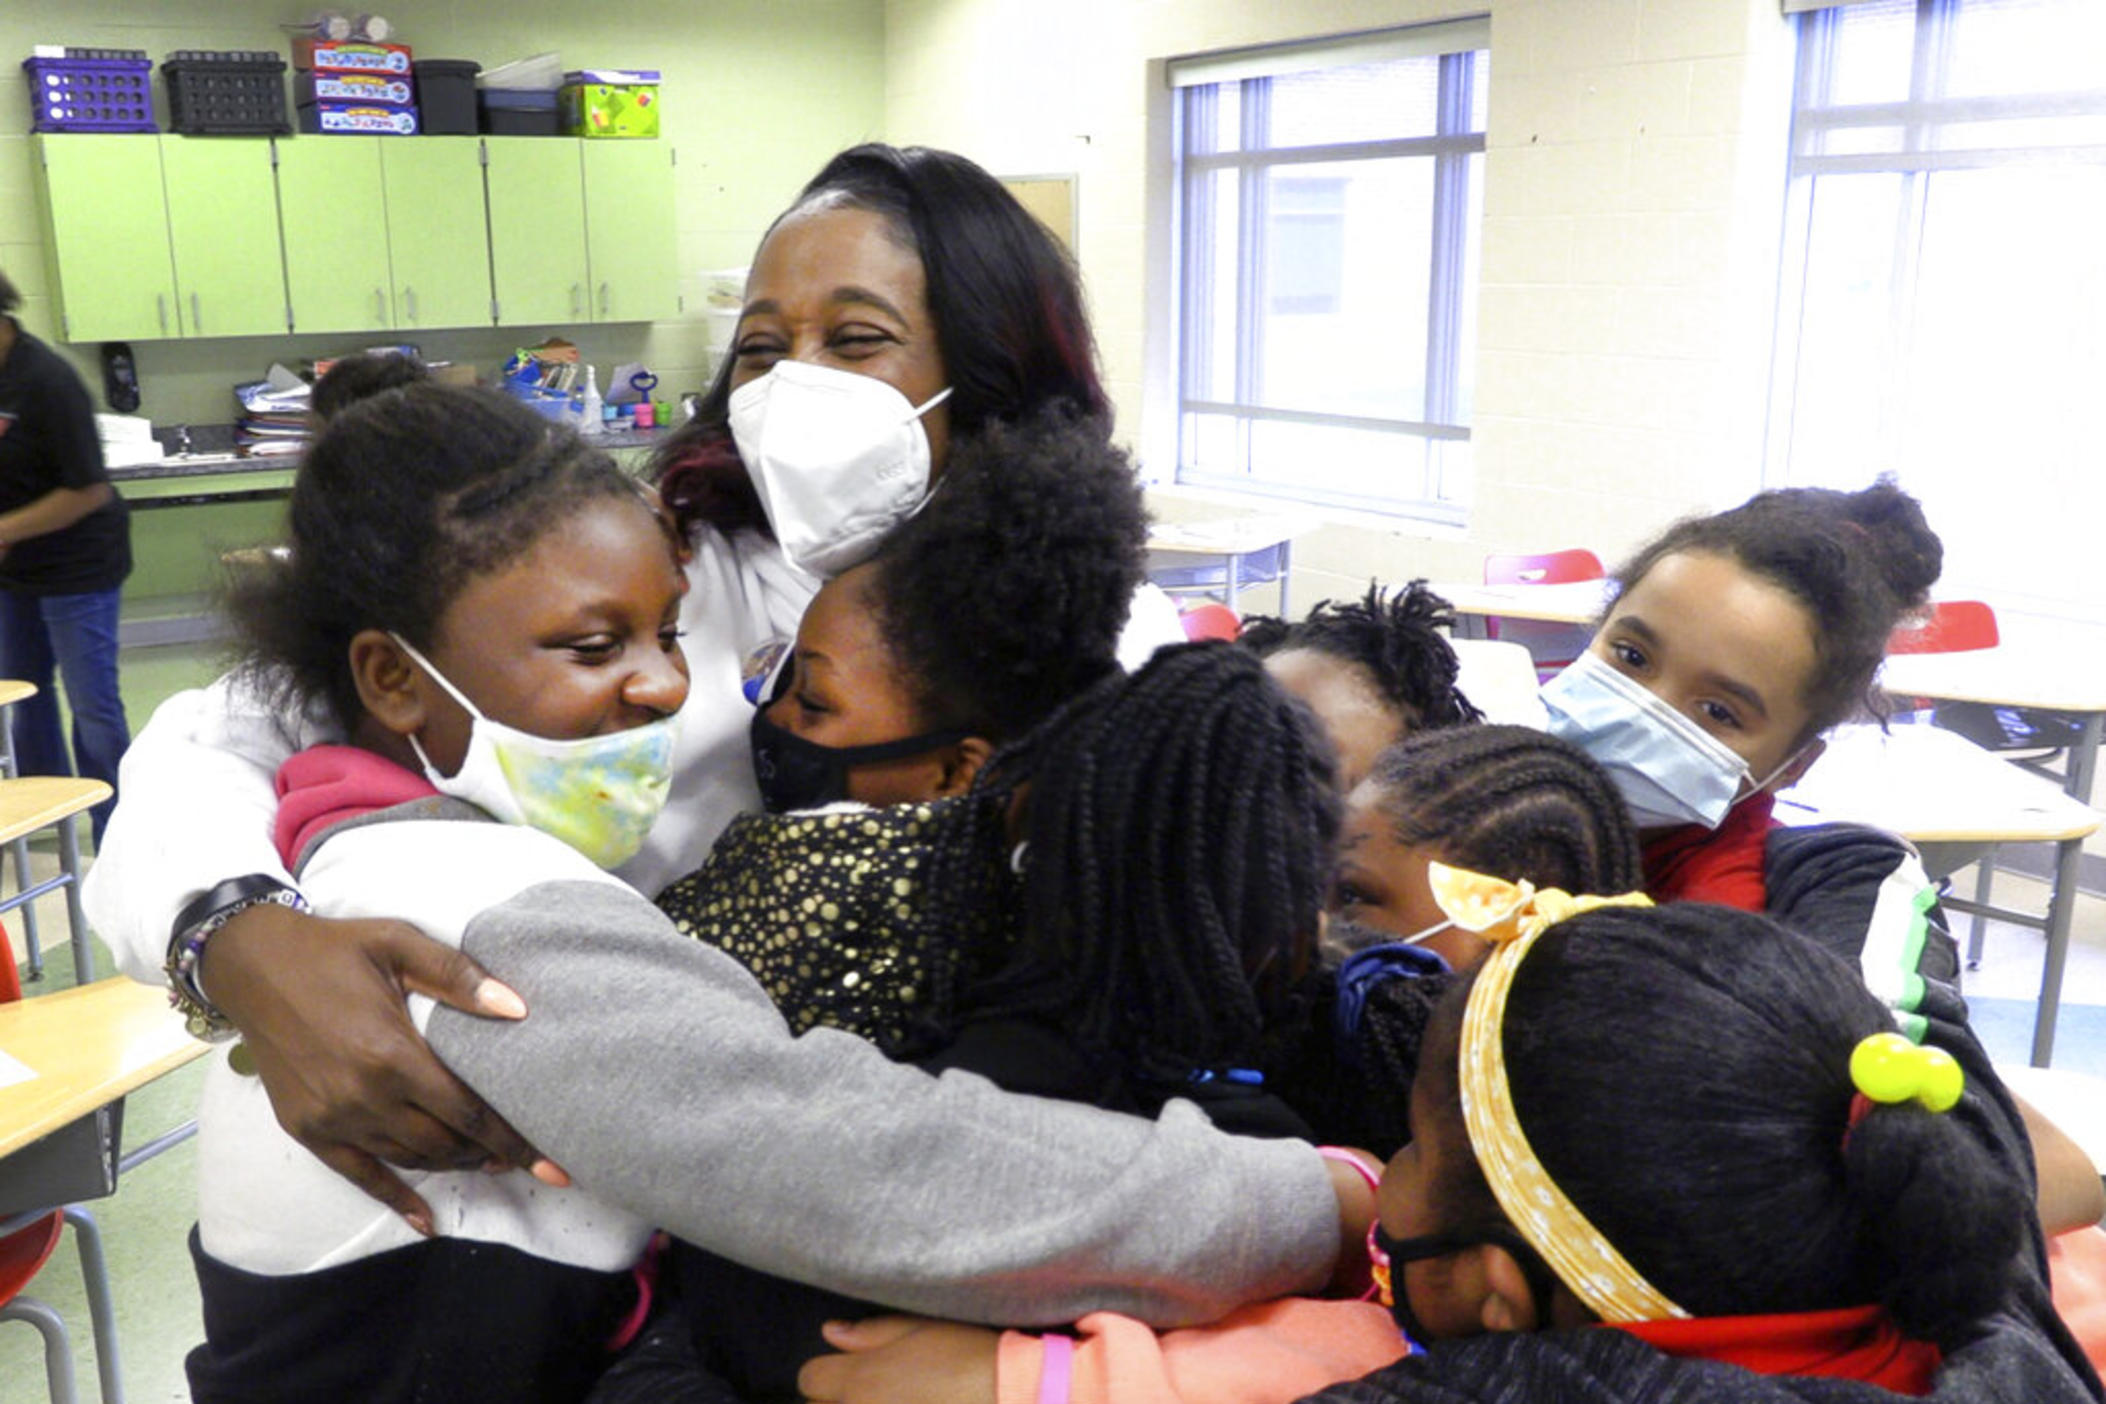 Shameika Averett, founder of Gigi's PEARLS, Inc., hugs students at Dorothy Height Elementary School on Jan. 14, 2021, in Columbus, Ga., after he first meeting of Gigi's PEARLS. Six years after her daughter, mother and brother were murdered in a triple homicide, Averett created the nonprofit organization to help Columbus area girls become successful women who are constructive citizens in their community — and don’t tolerate violence.